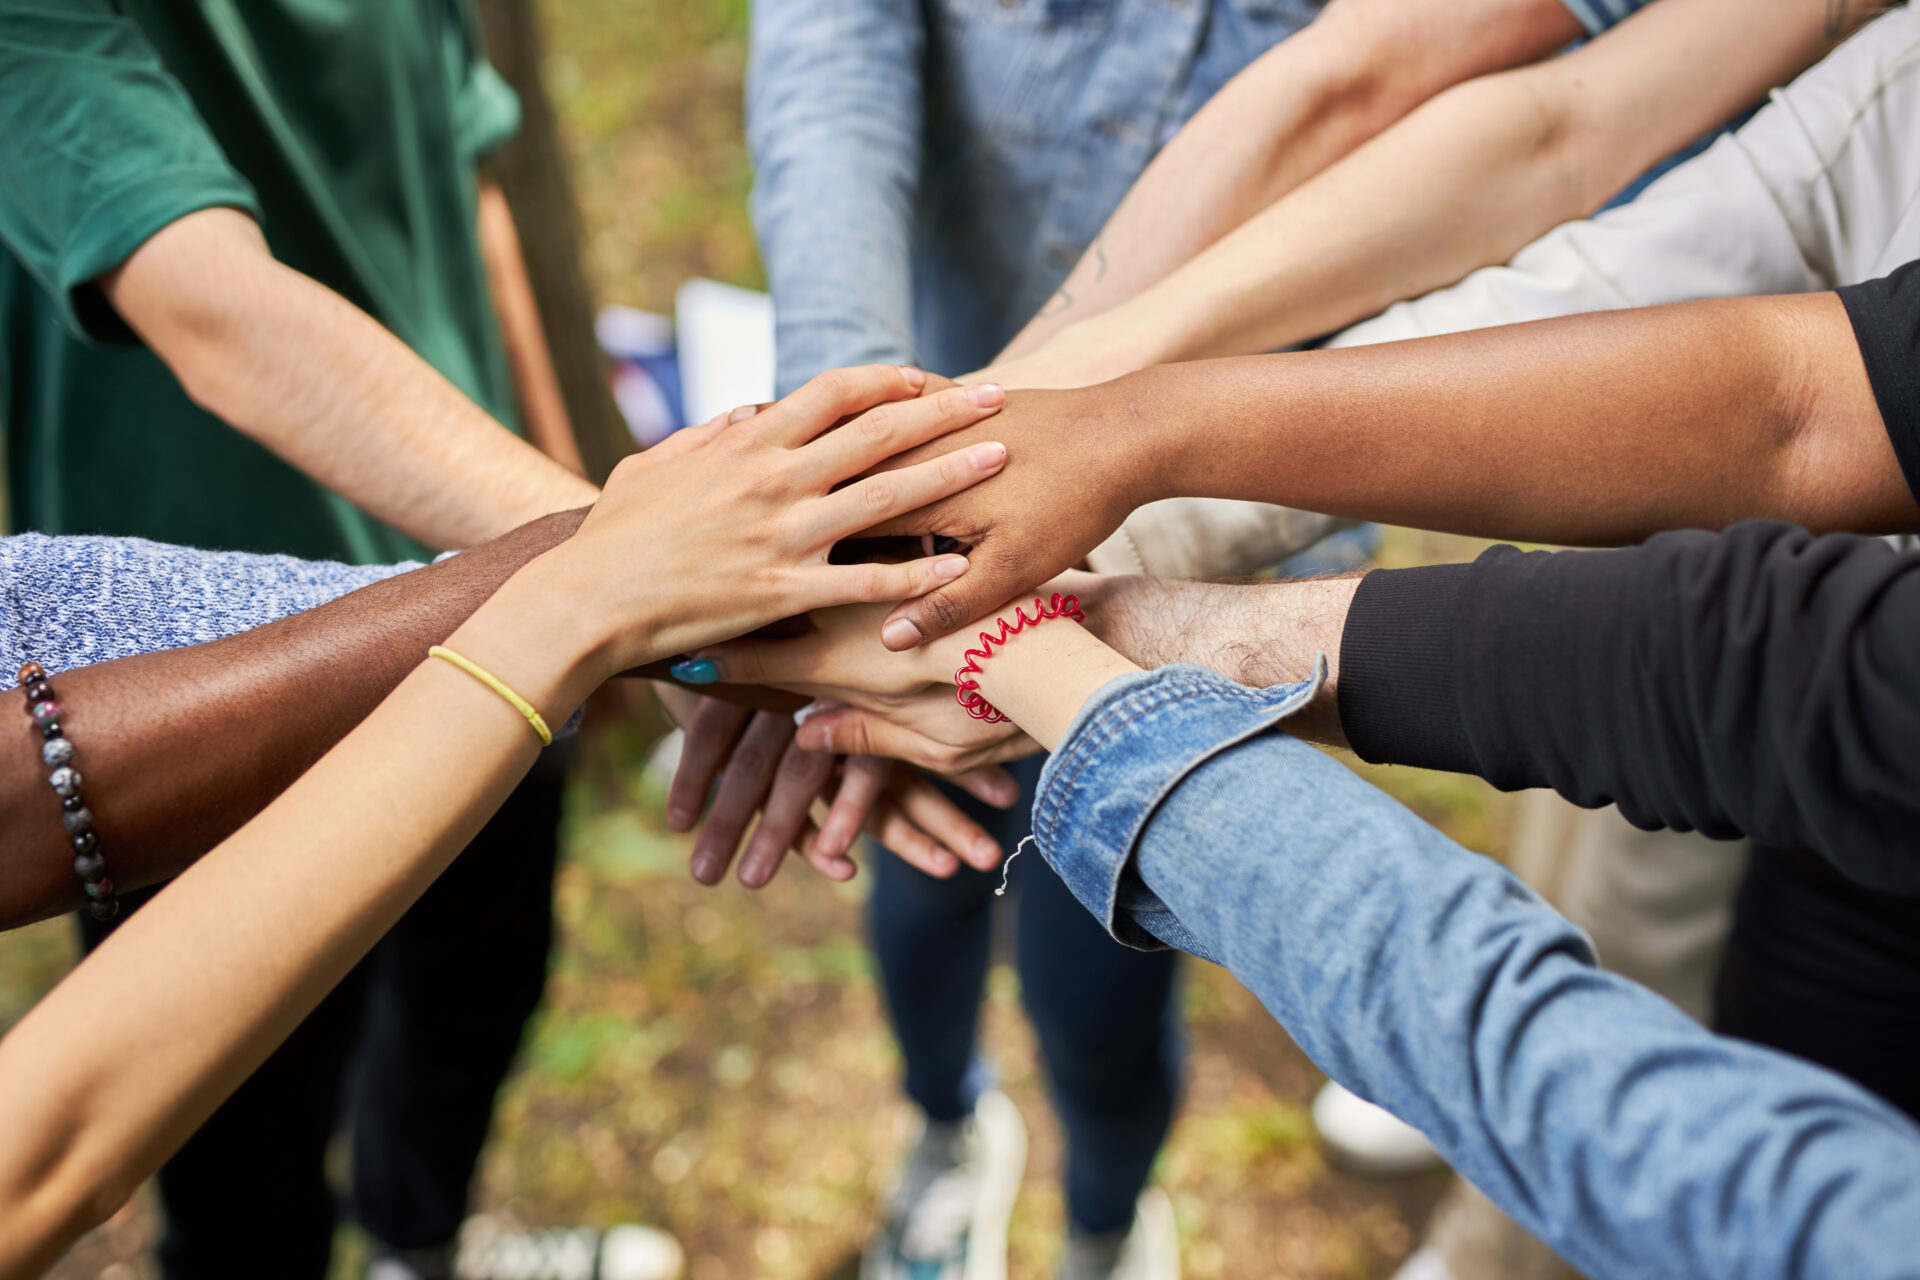 Close-up photo of diverse people's hands gathered together